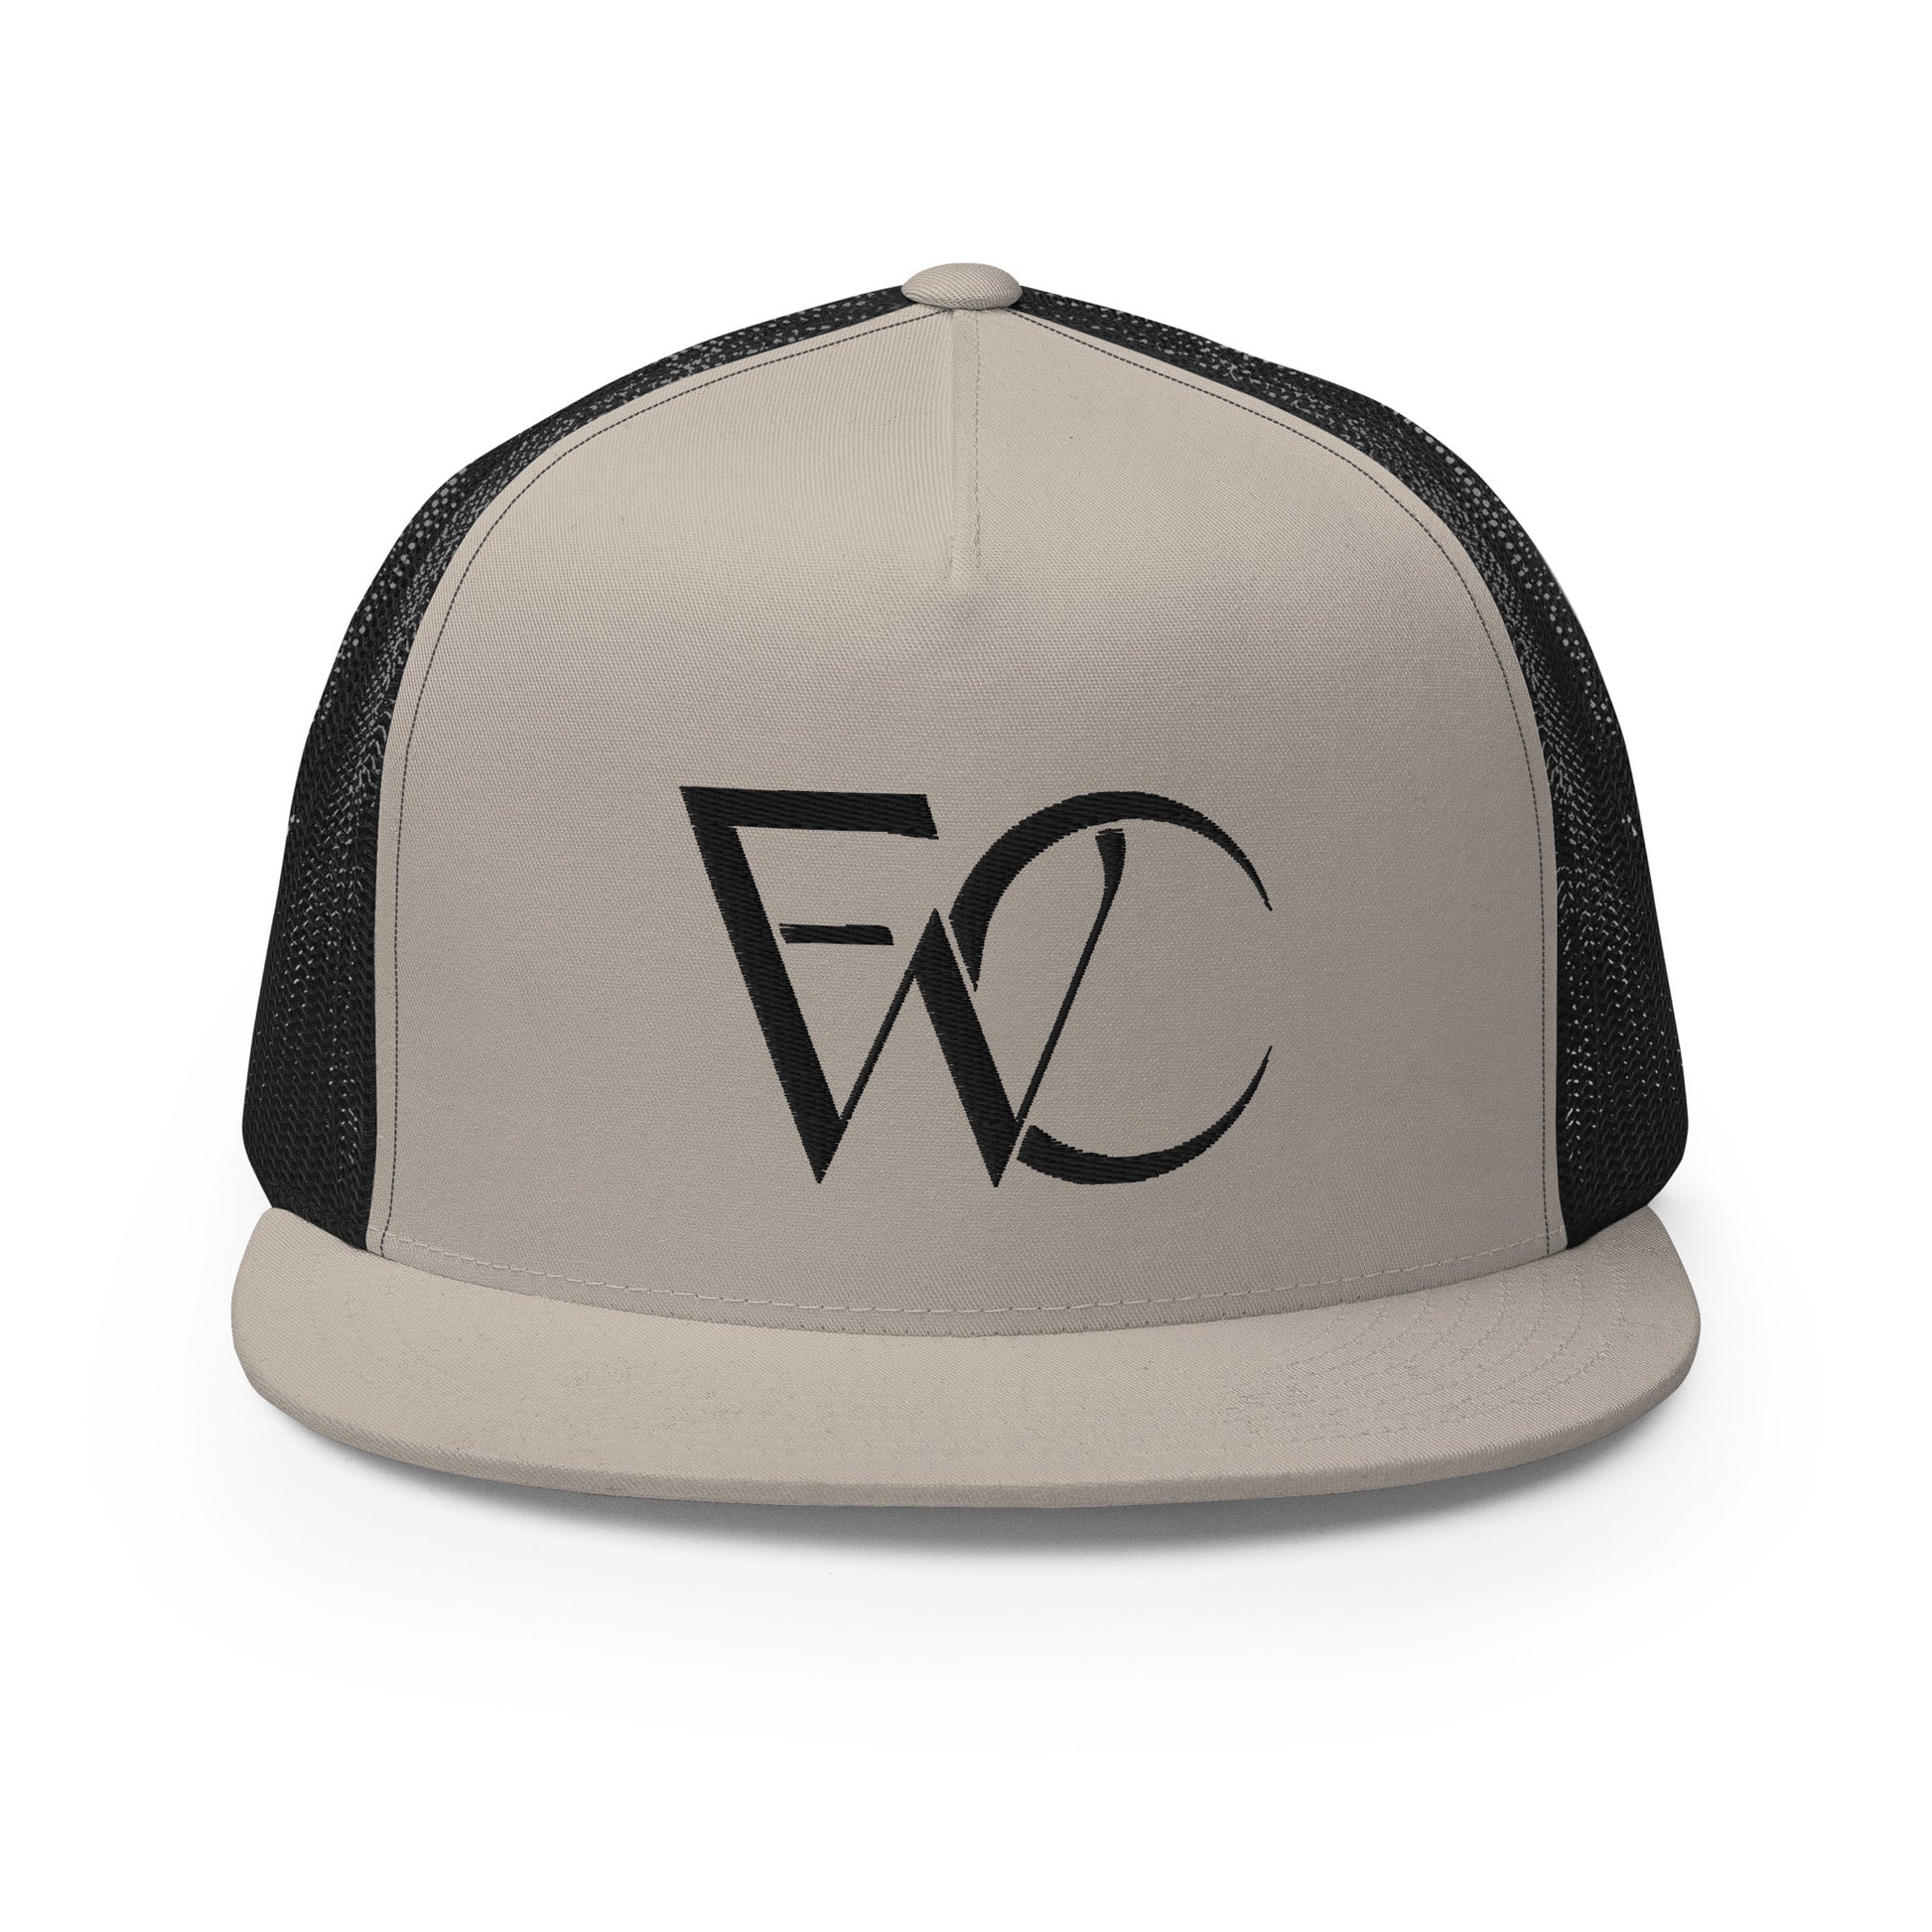 5-panel trucker hat with flat bill, 4 back panels are black, front panel is and bill a silver-tan with the word the logo mark embroidered on it. logo mark specs out FWC.